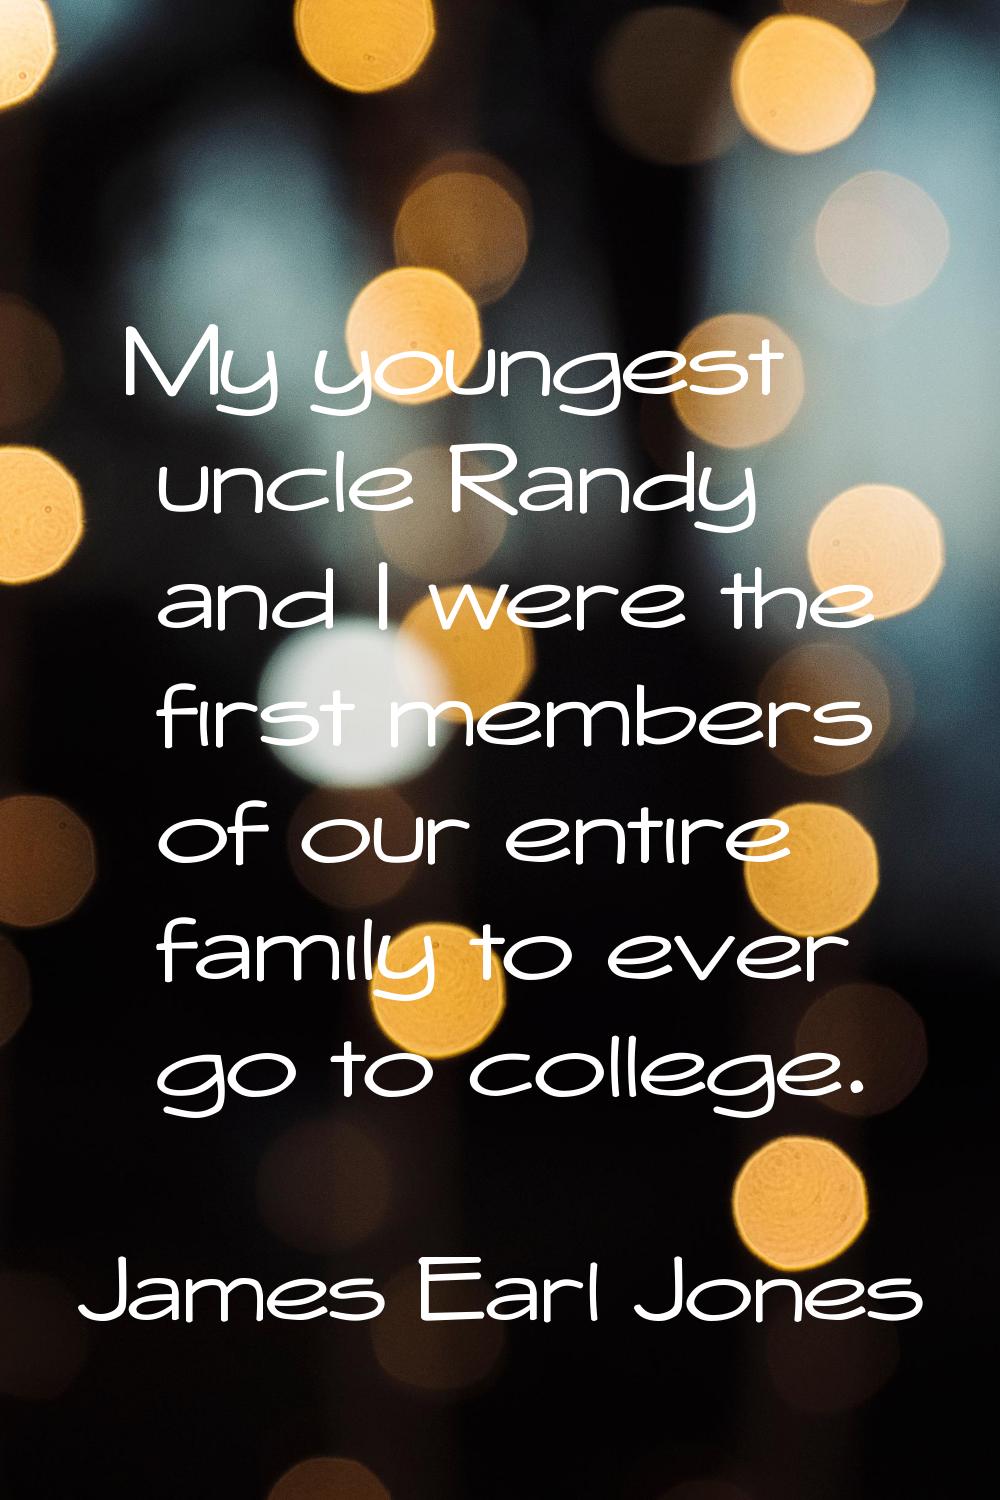 My youngest uncle Randy and I were the first members of our entire family to ever go to college.